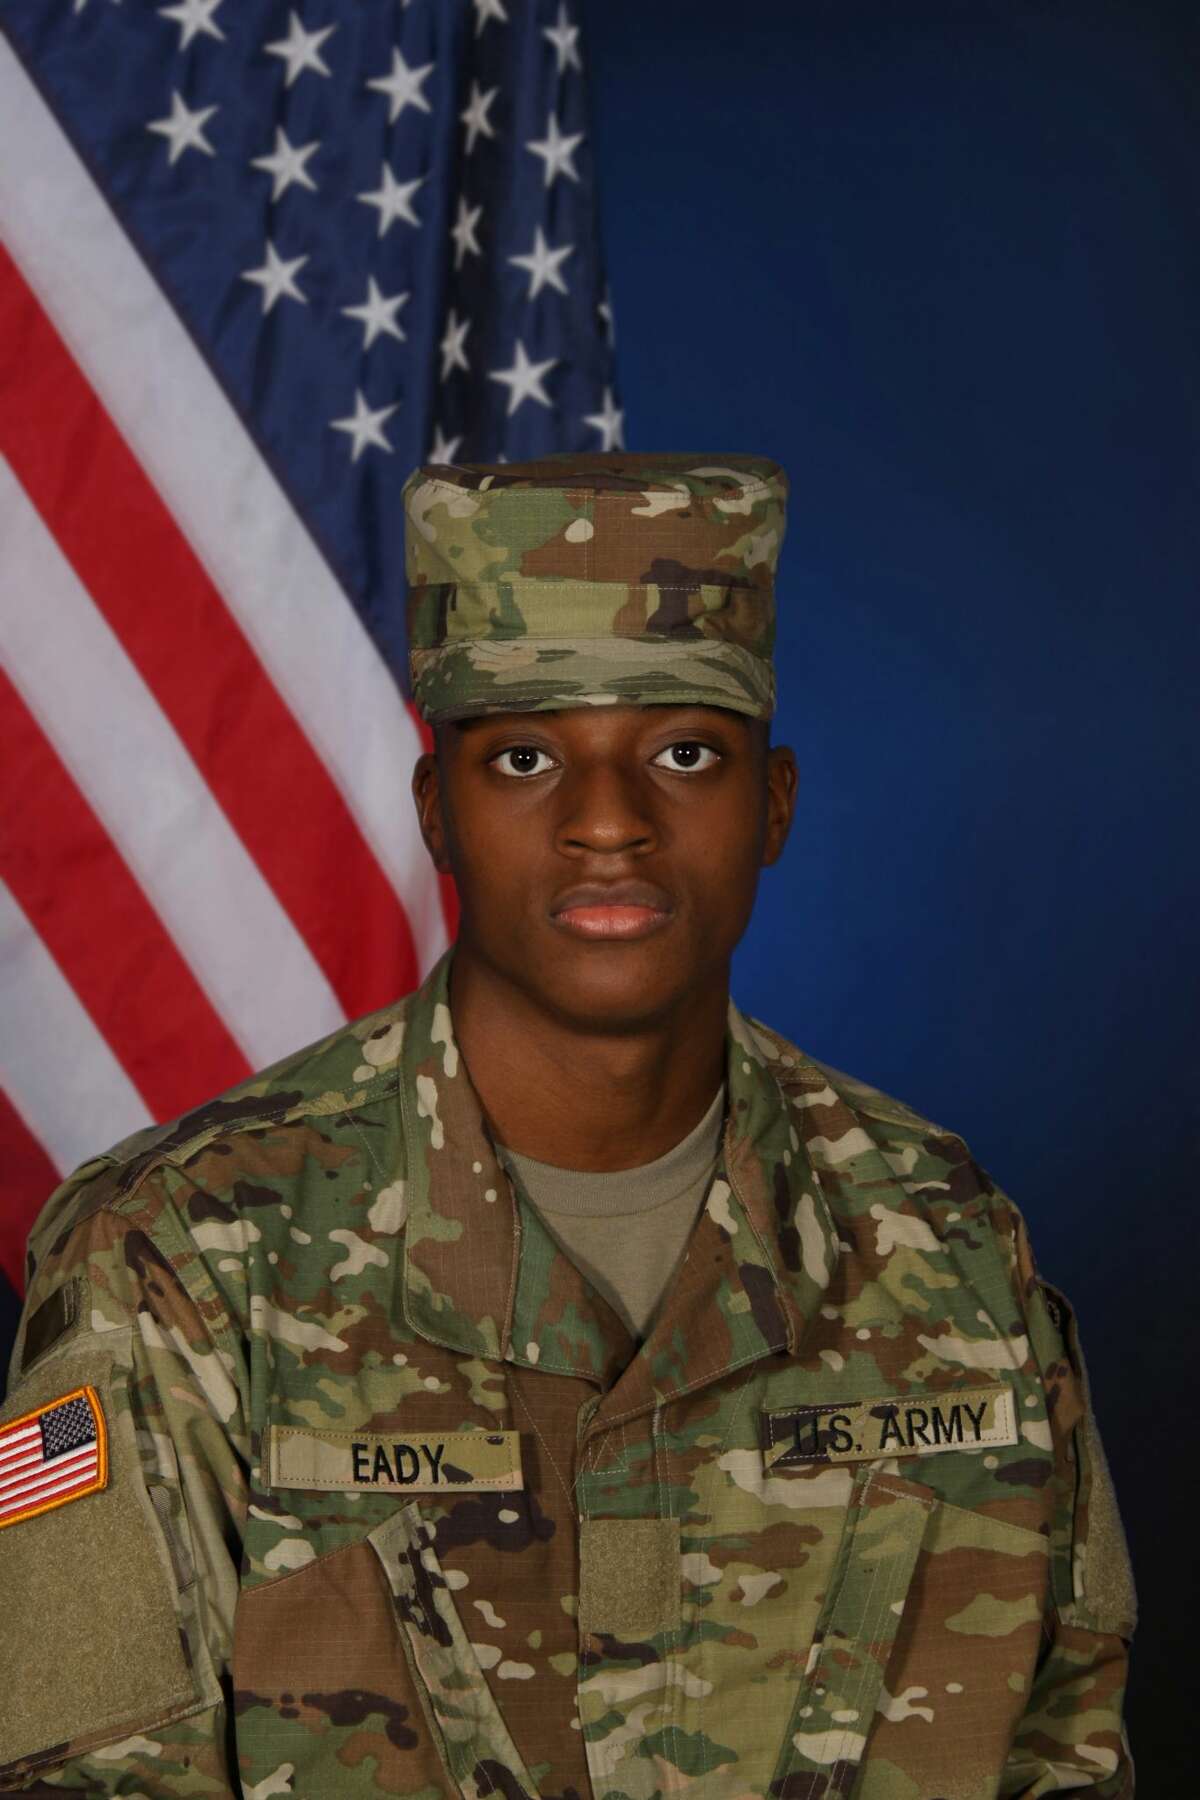 Pfc. Nylyn Eady, 19, was found dead by emergency personnel in the city of Converse on Monday.